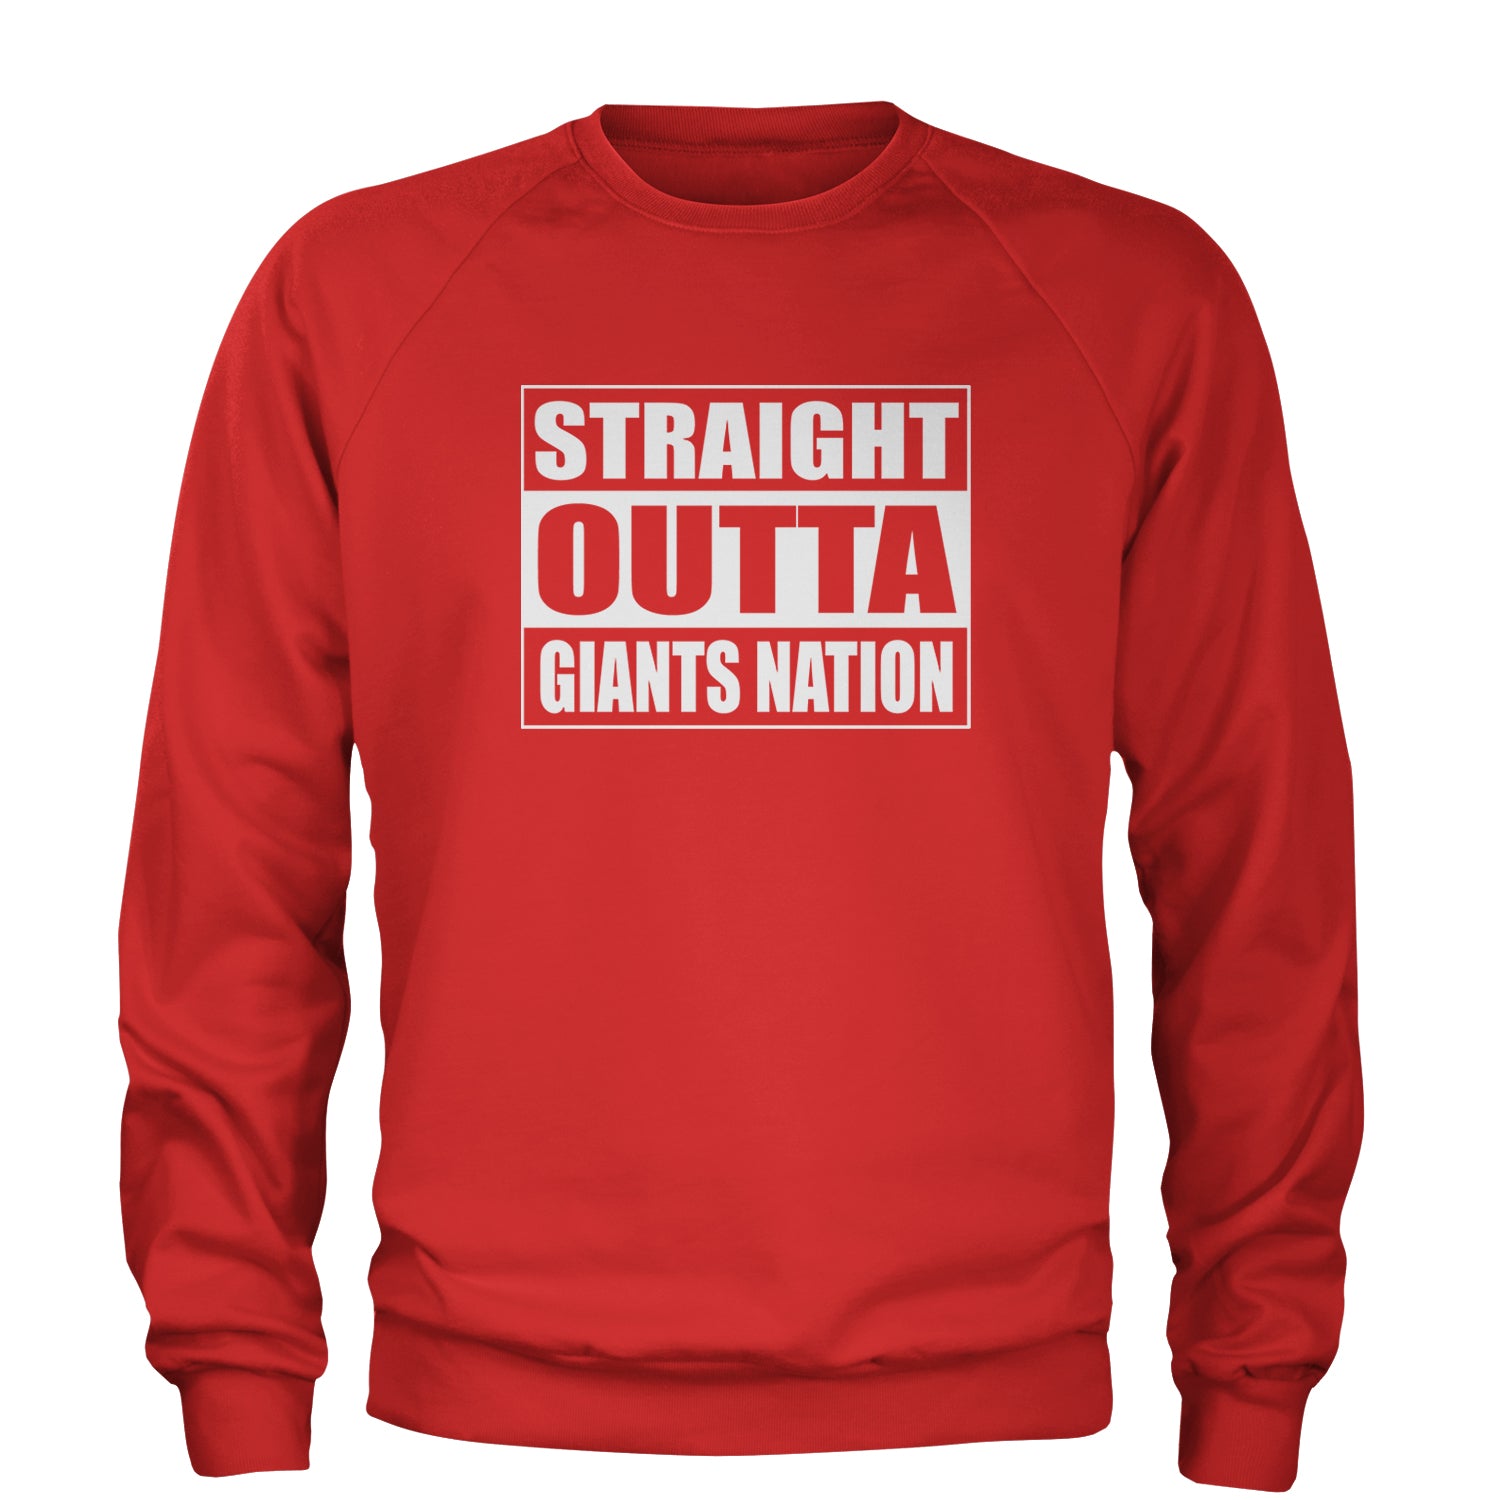 Straight Outta Giants Nation Adult Crewneck Sweatshirt bleed, blue, football, giants, new, ny, york by Expression Tees